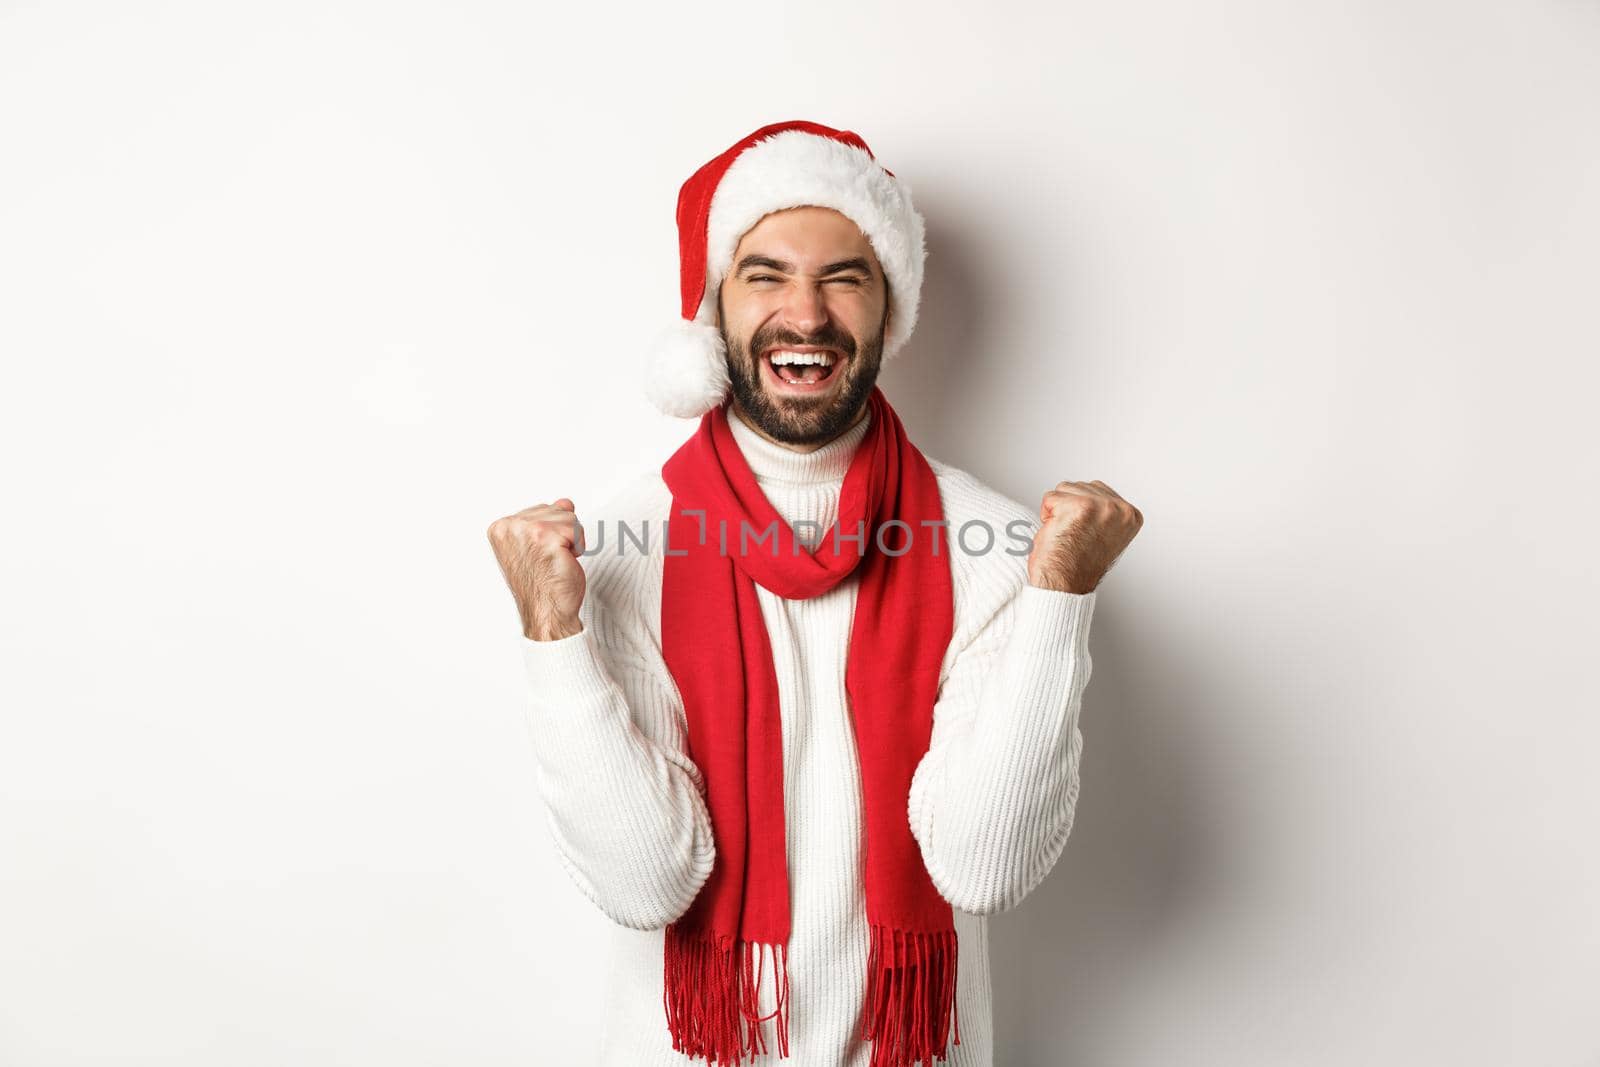 Christmas holidays. Man winner celebrating and triumphing, raising hands up in rejoice, achieve goal, wearing Santa hat and red scarf, white background.